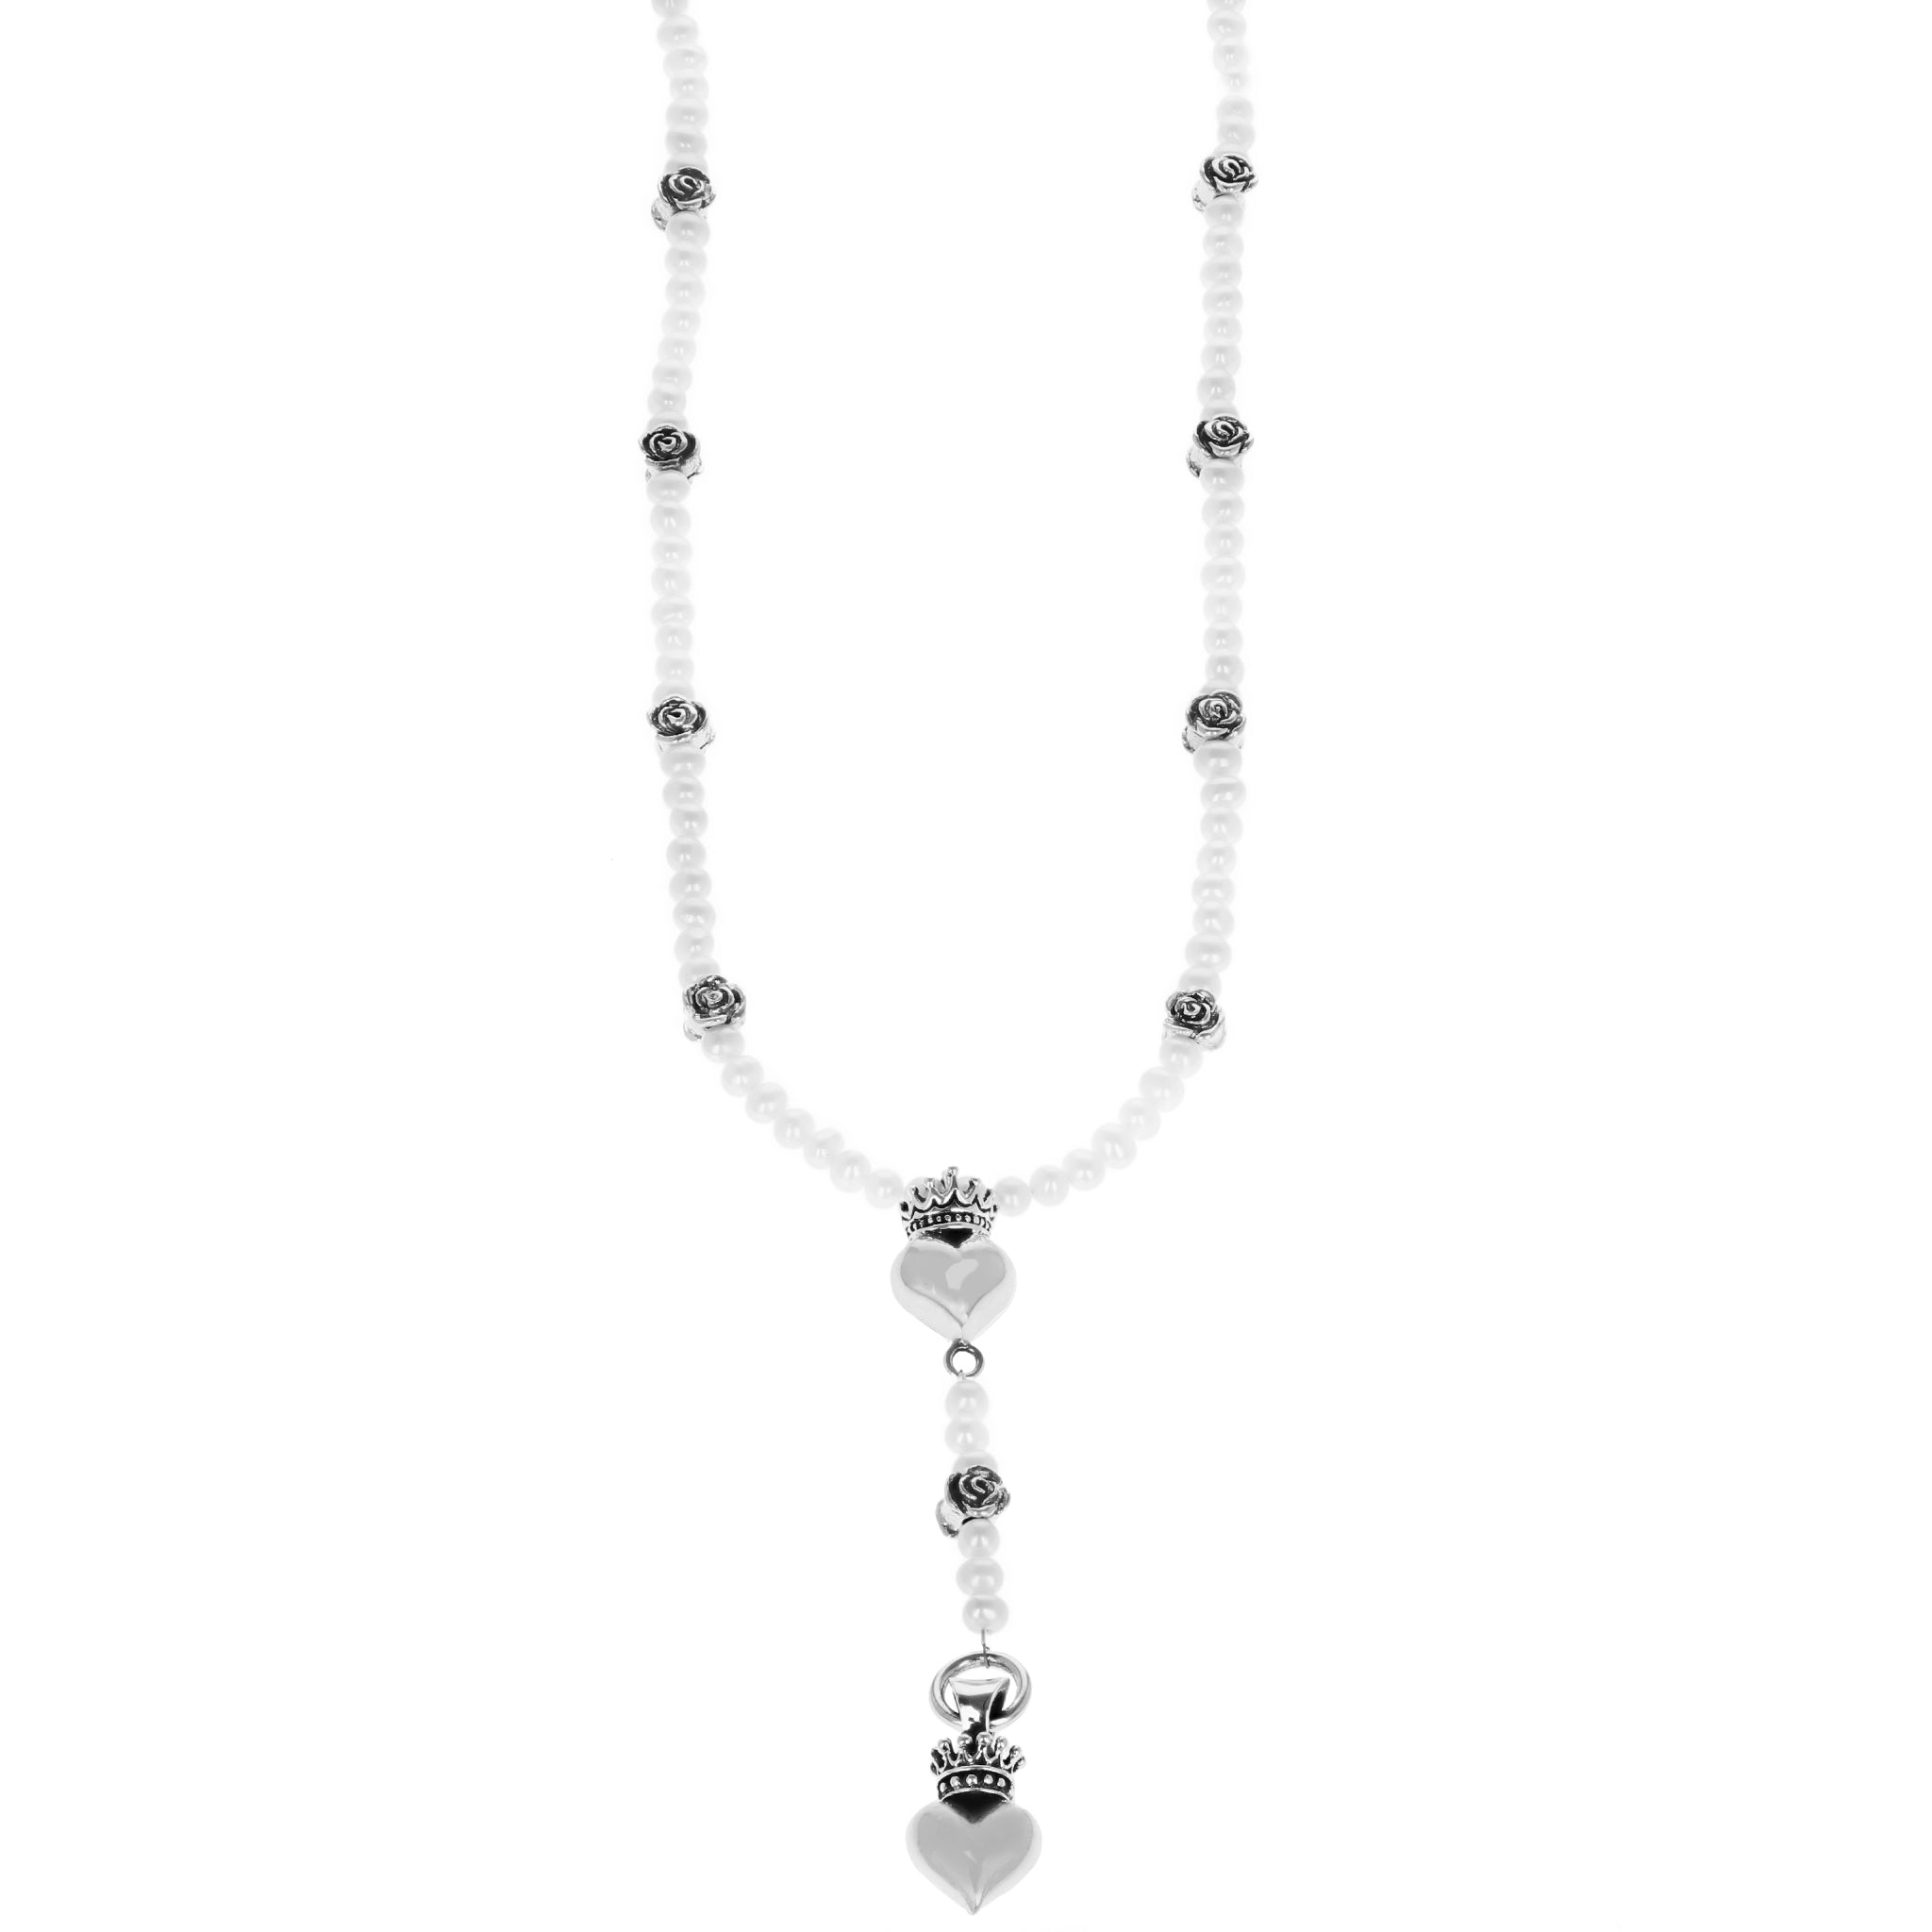 Rosary necklace in silver and pearls – B.A.T. ASSISI STORE